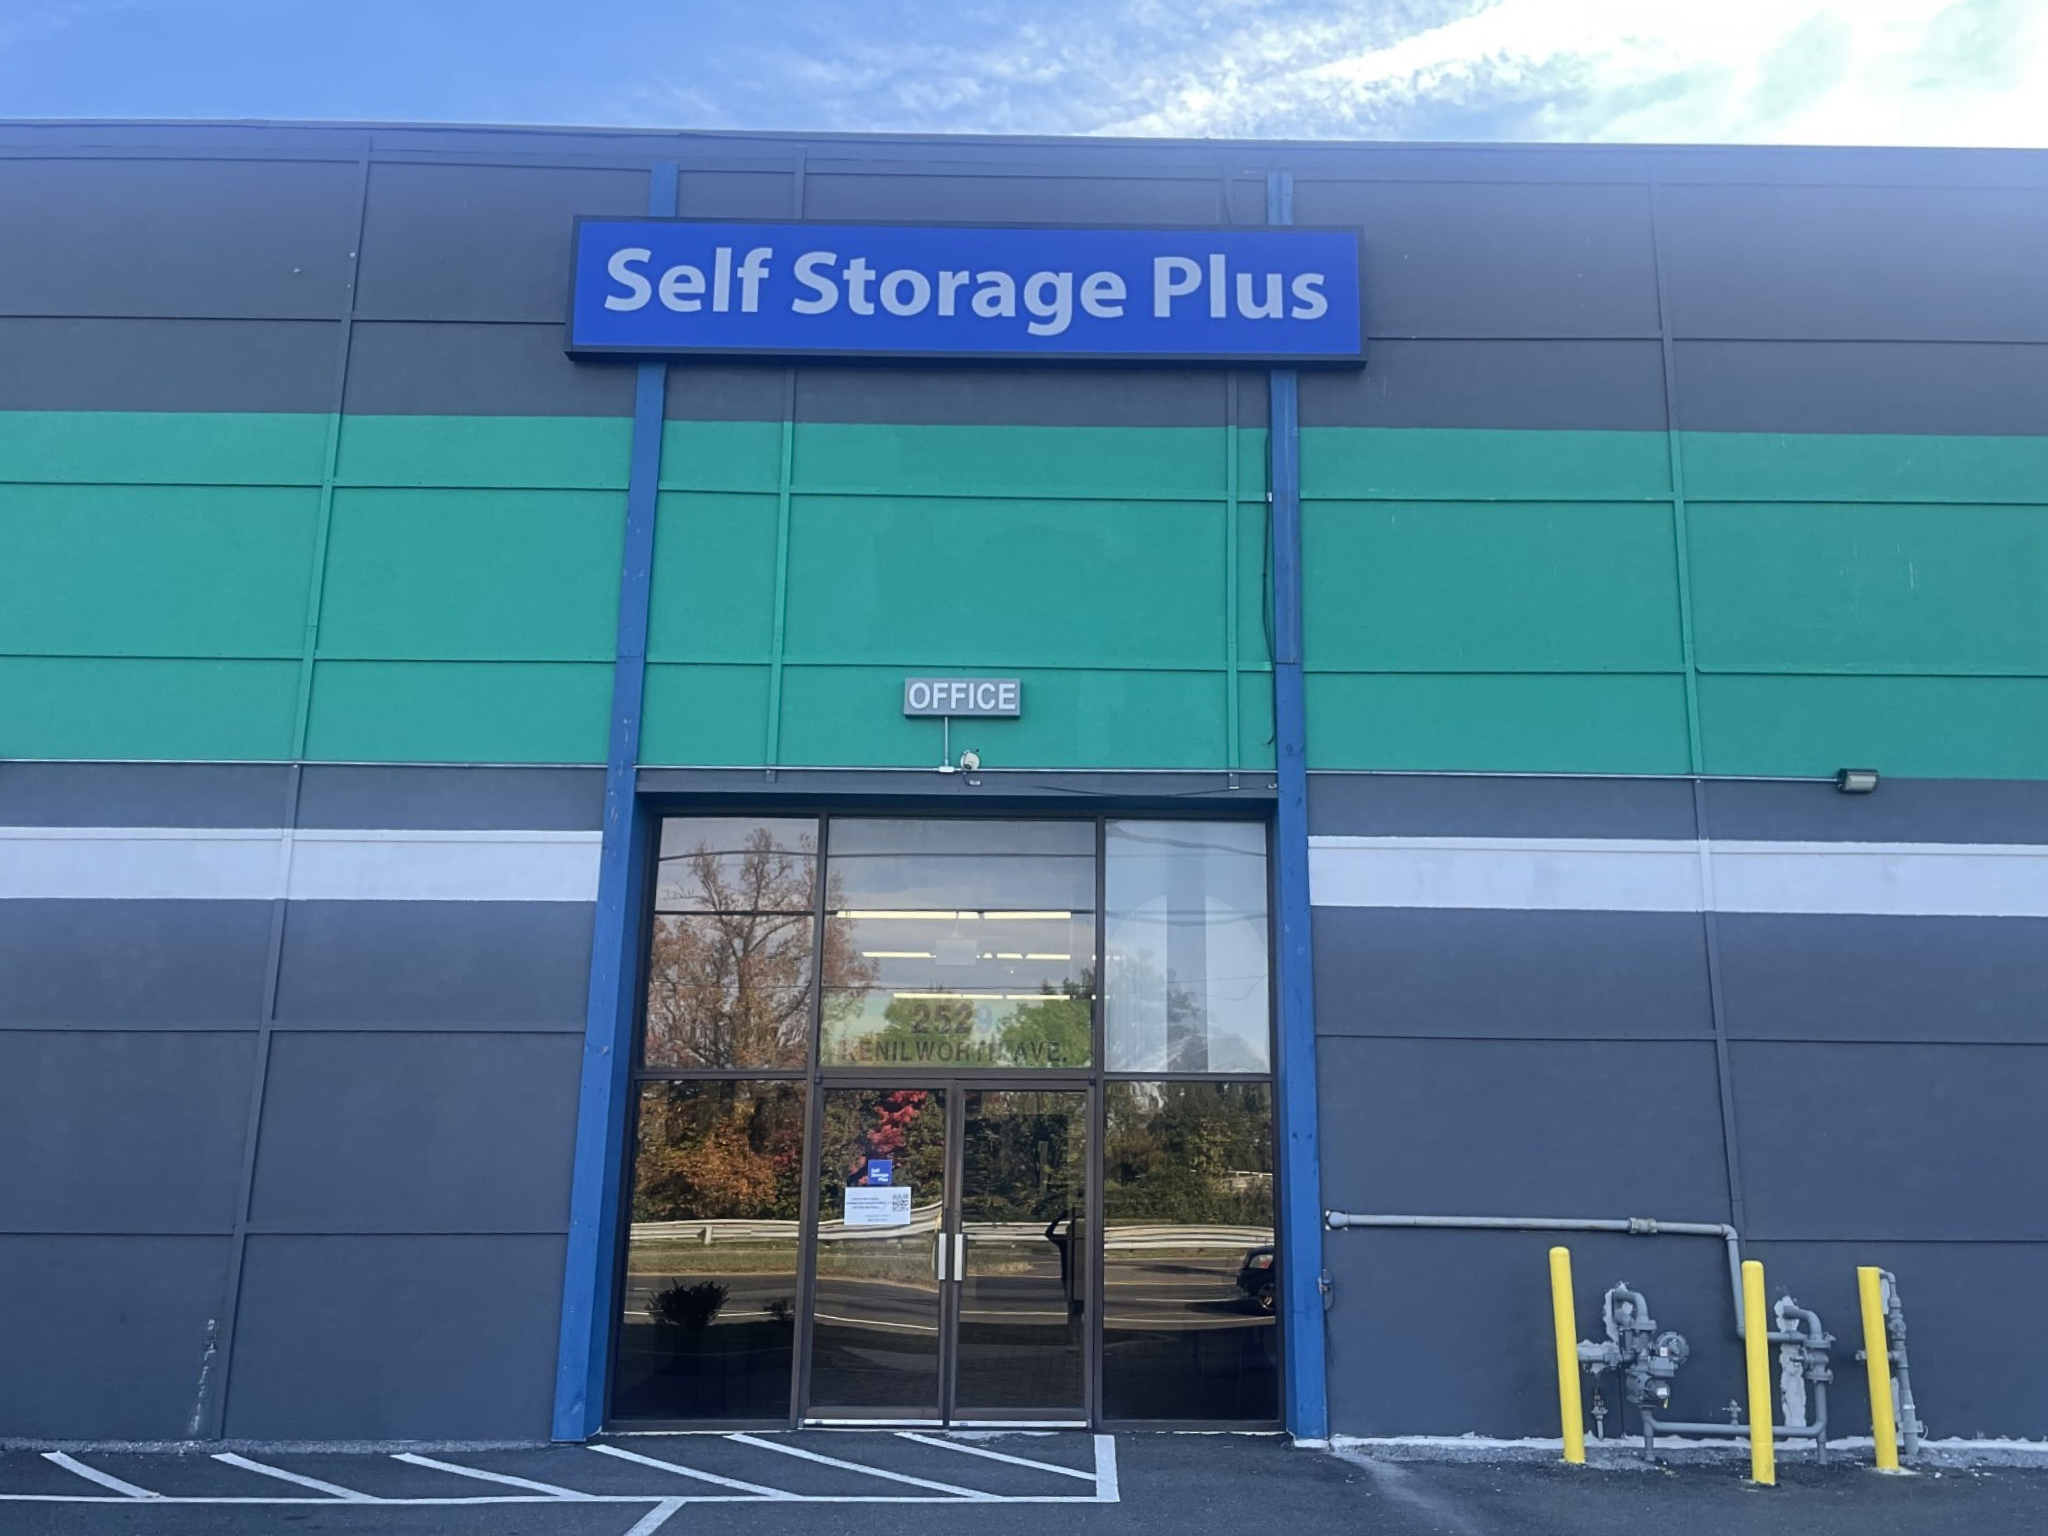 Entrance of Self Storage Plus Facility that is located in Hyattsville, MD